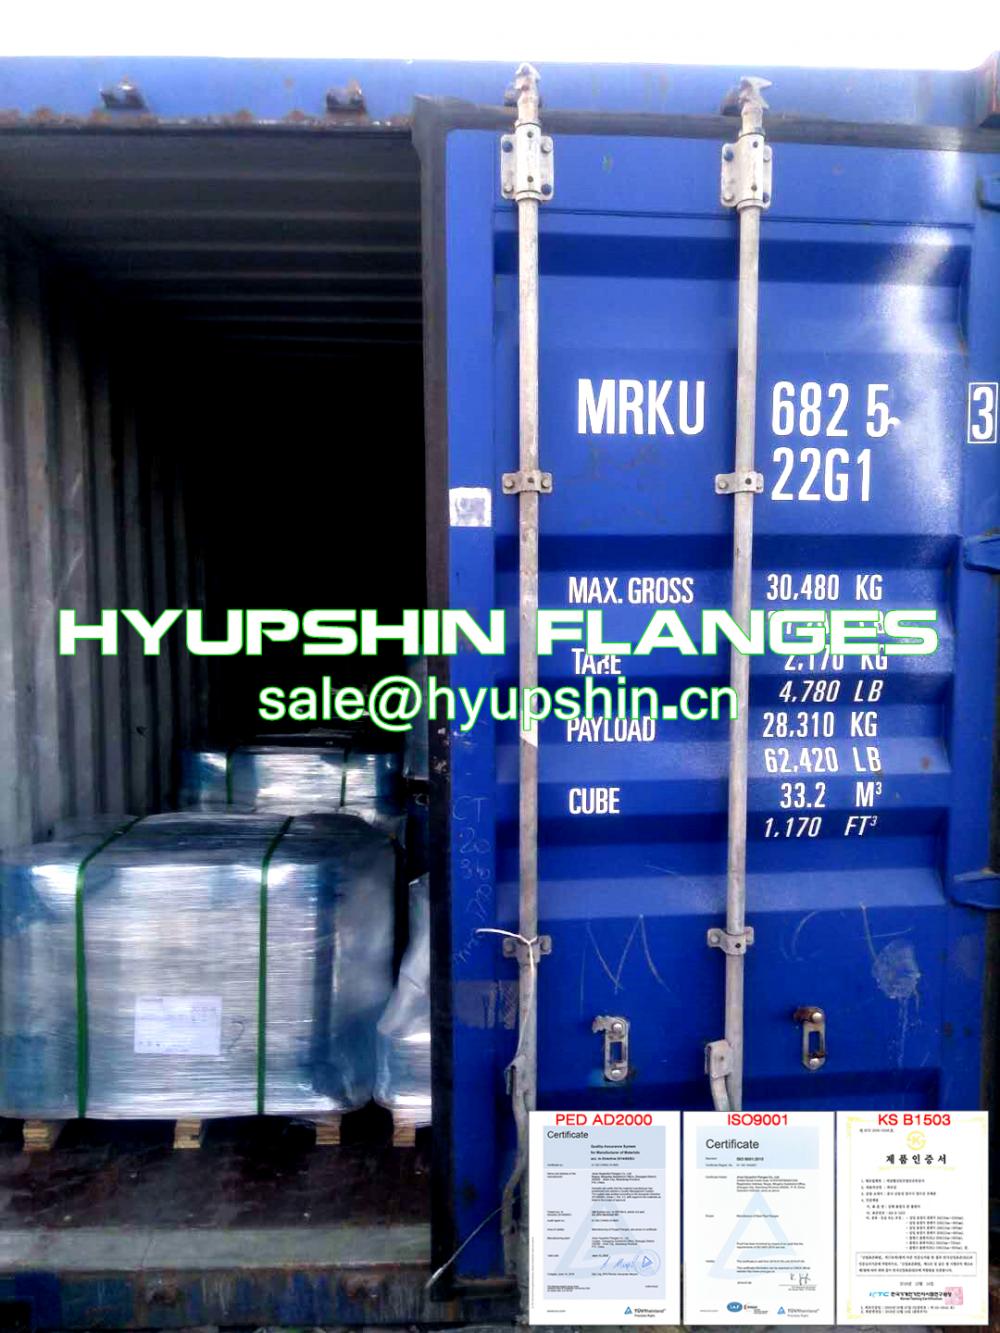 Hyupshin Flanges Export to Europe By Sea Transport